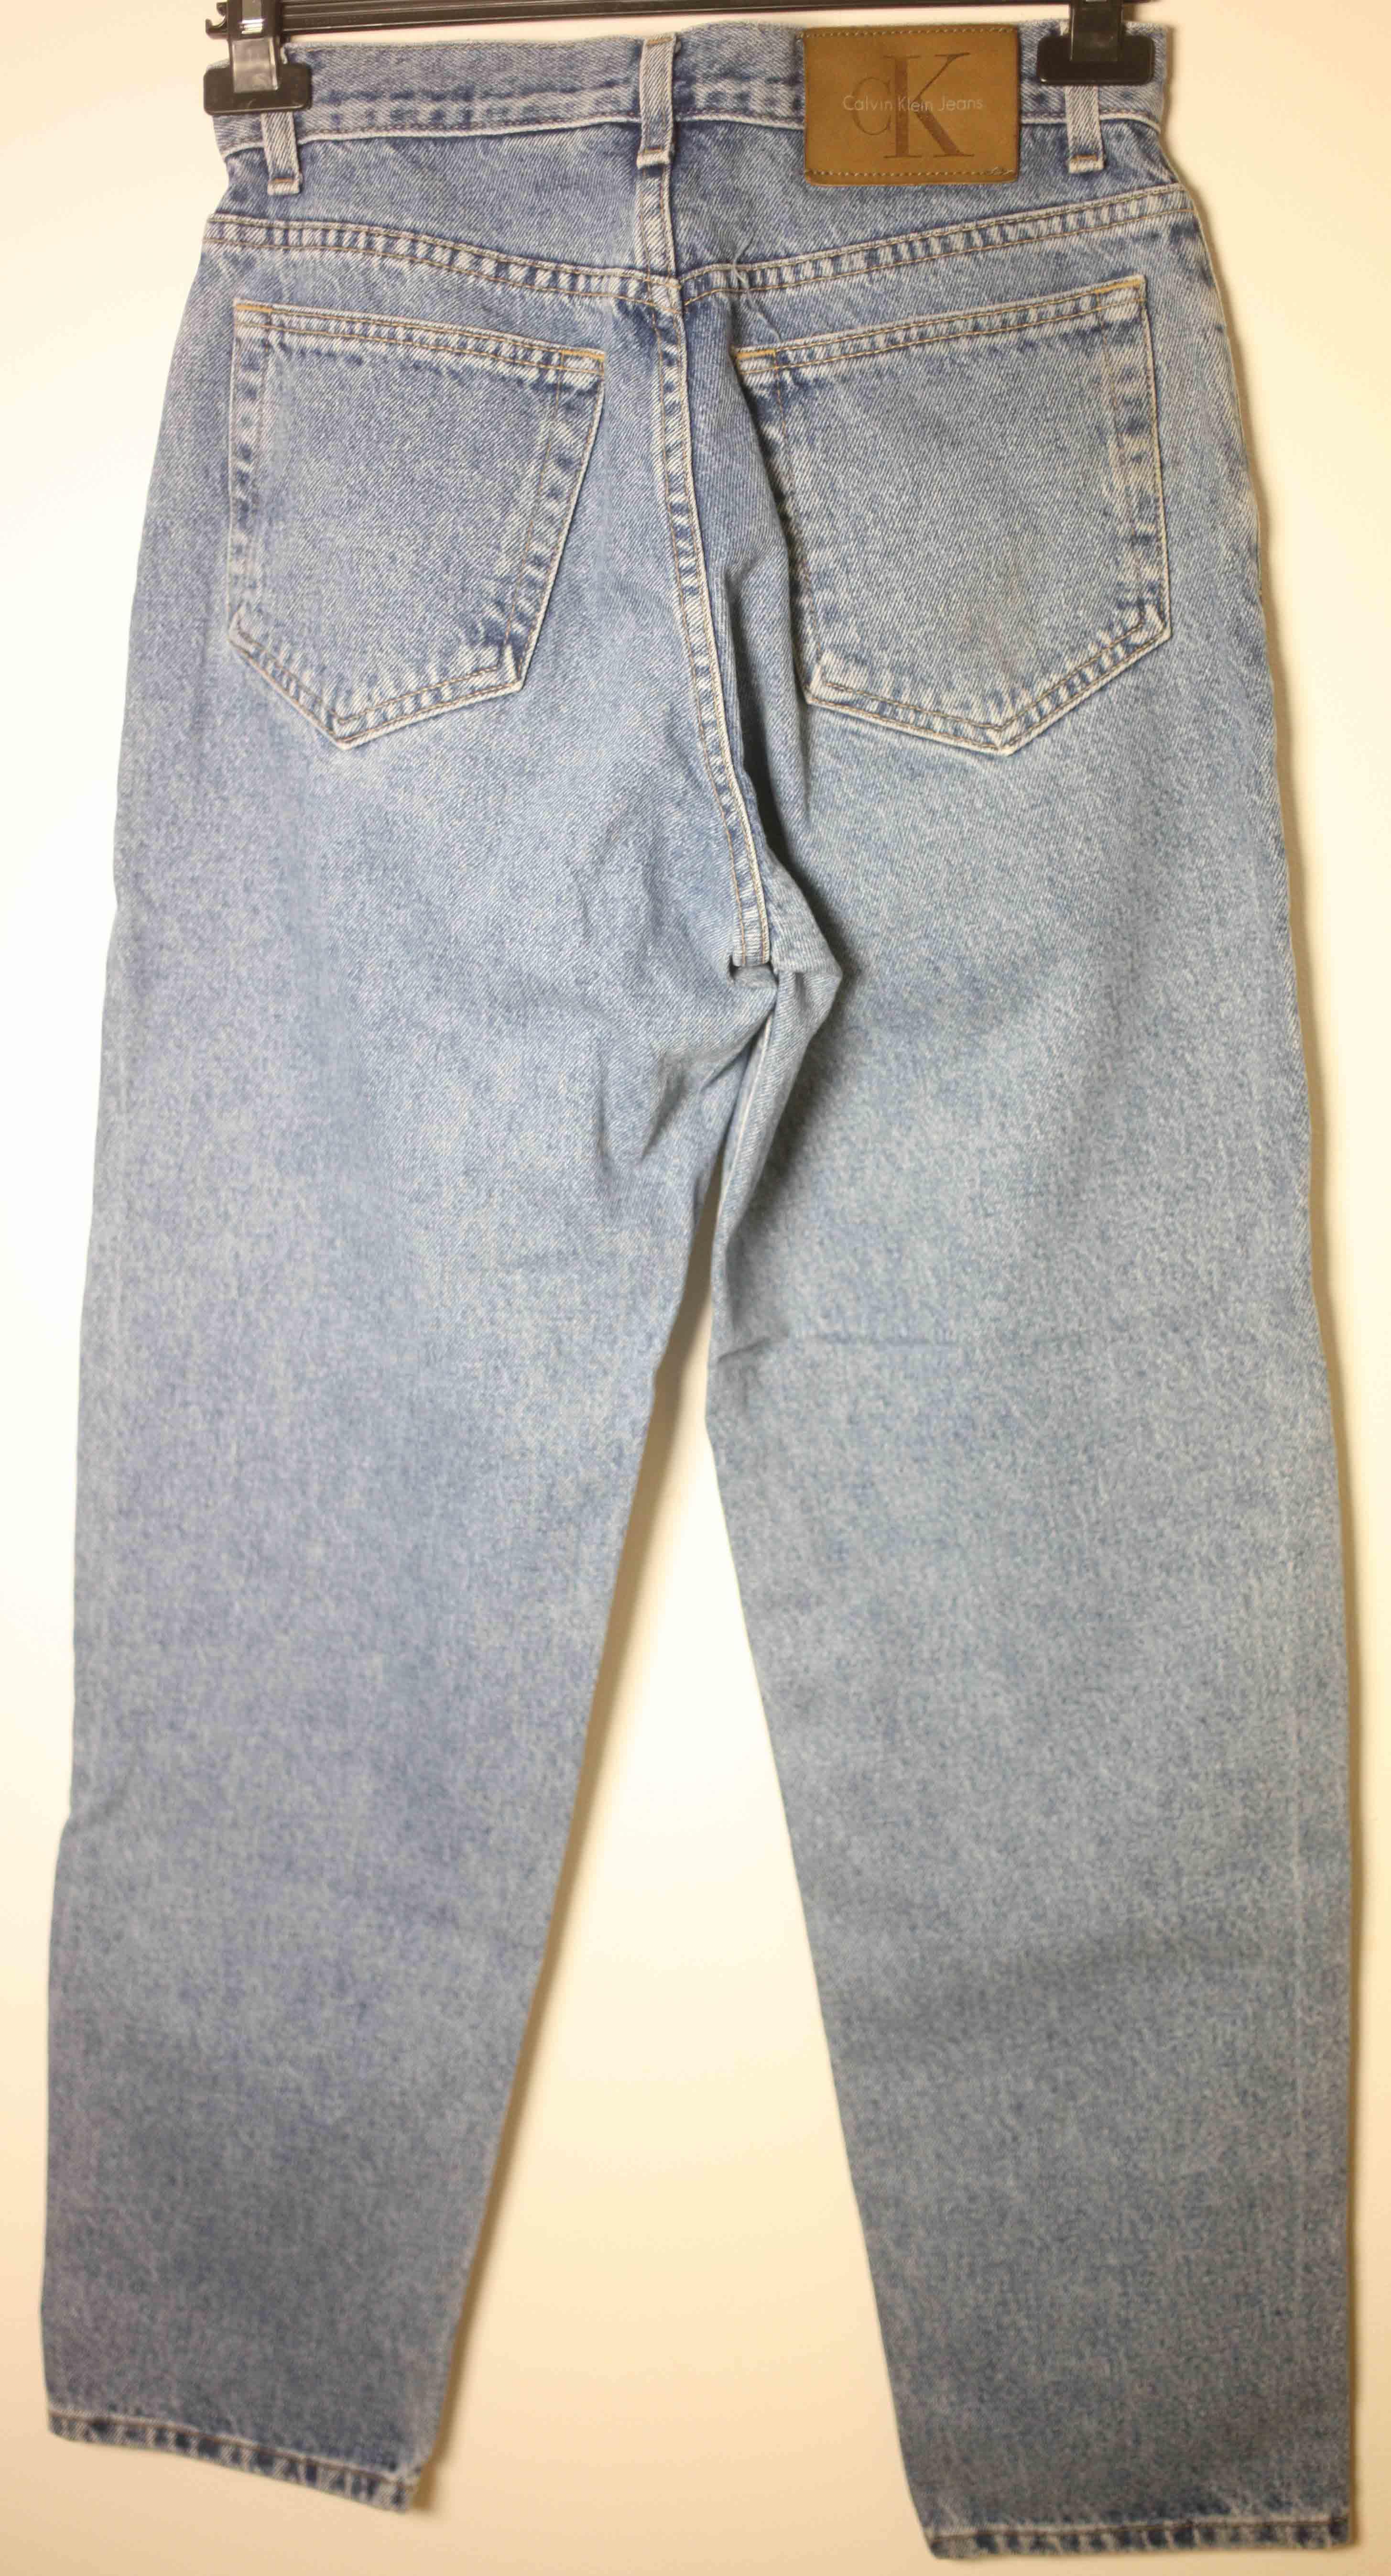 CALVIN BLUE FADED JEANS-25 YEAR OLD PAIR-USED-EXCELLENT CONDITION-VERY RARE-FREE POSTAGE EUROPE